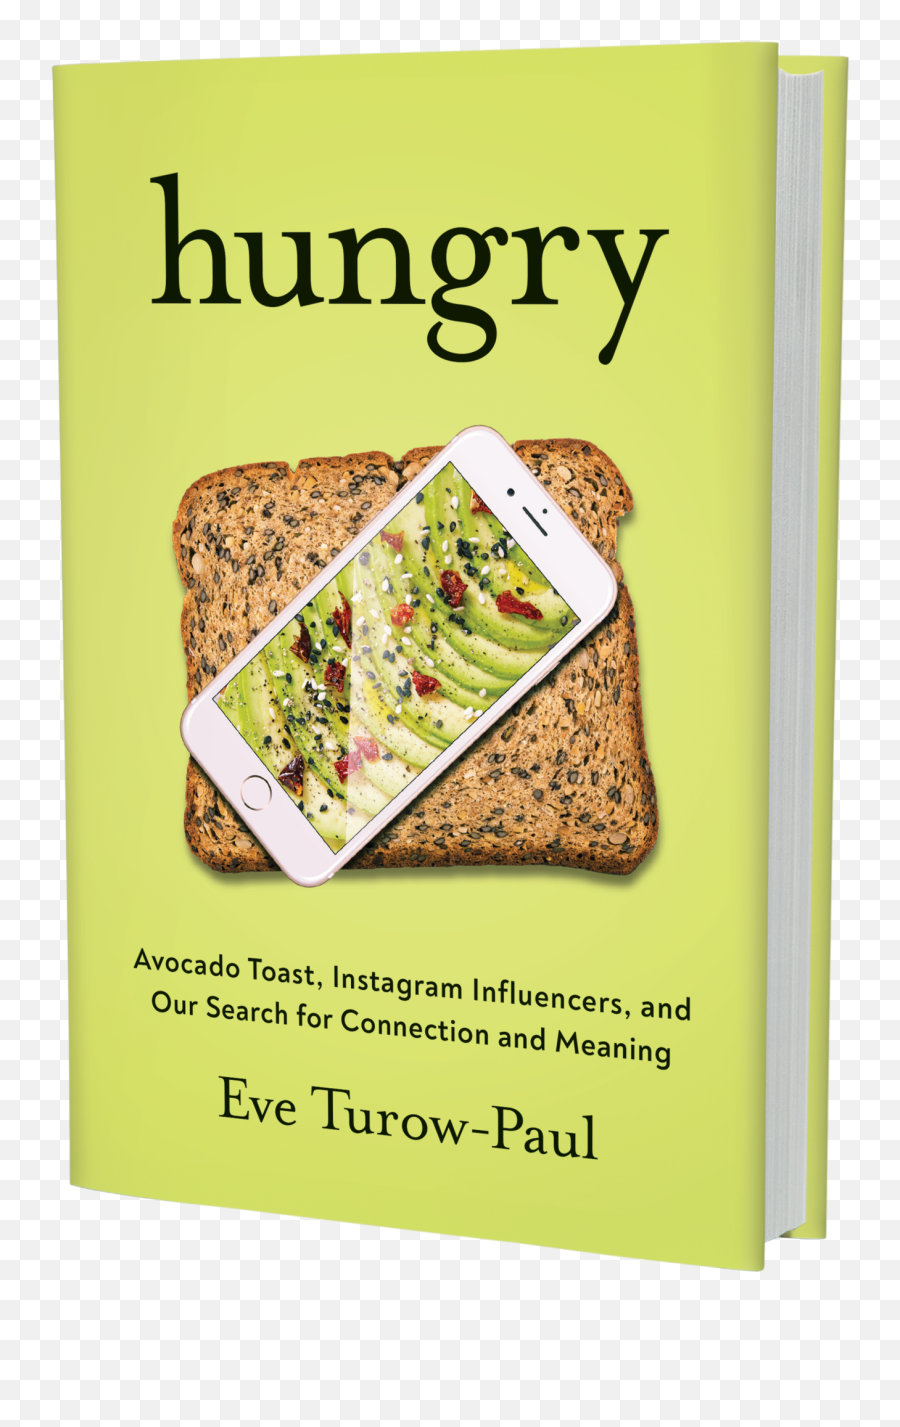 Hungry Avocado Toast Instagram Influencers And Our Search - Hungry Eve Turow Paul Emoji,Pictures Of People Showing Emotion Hunger